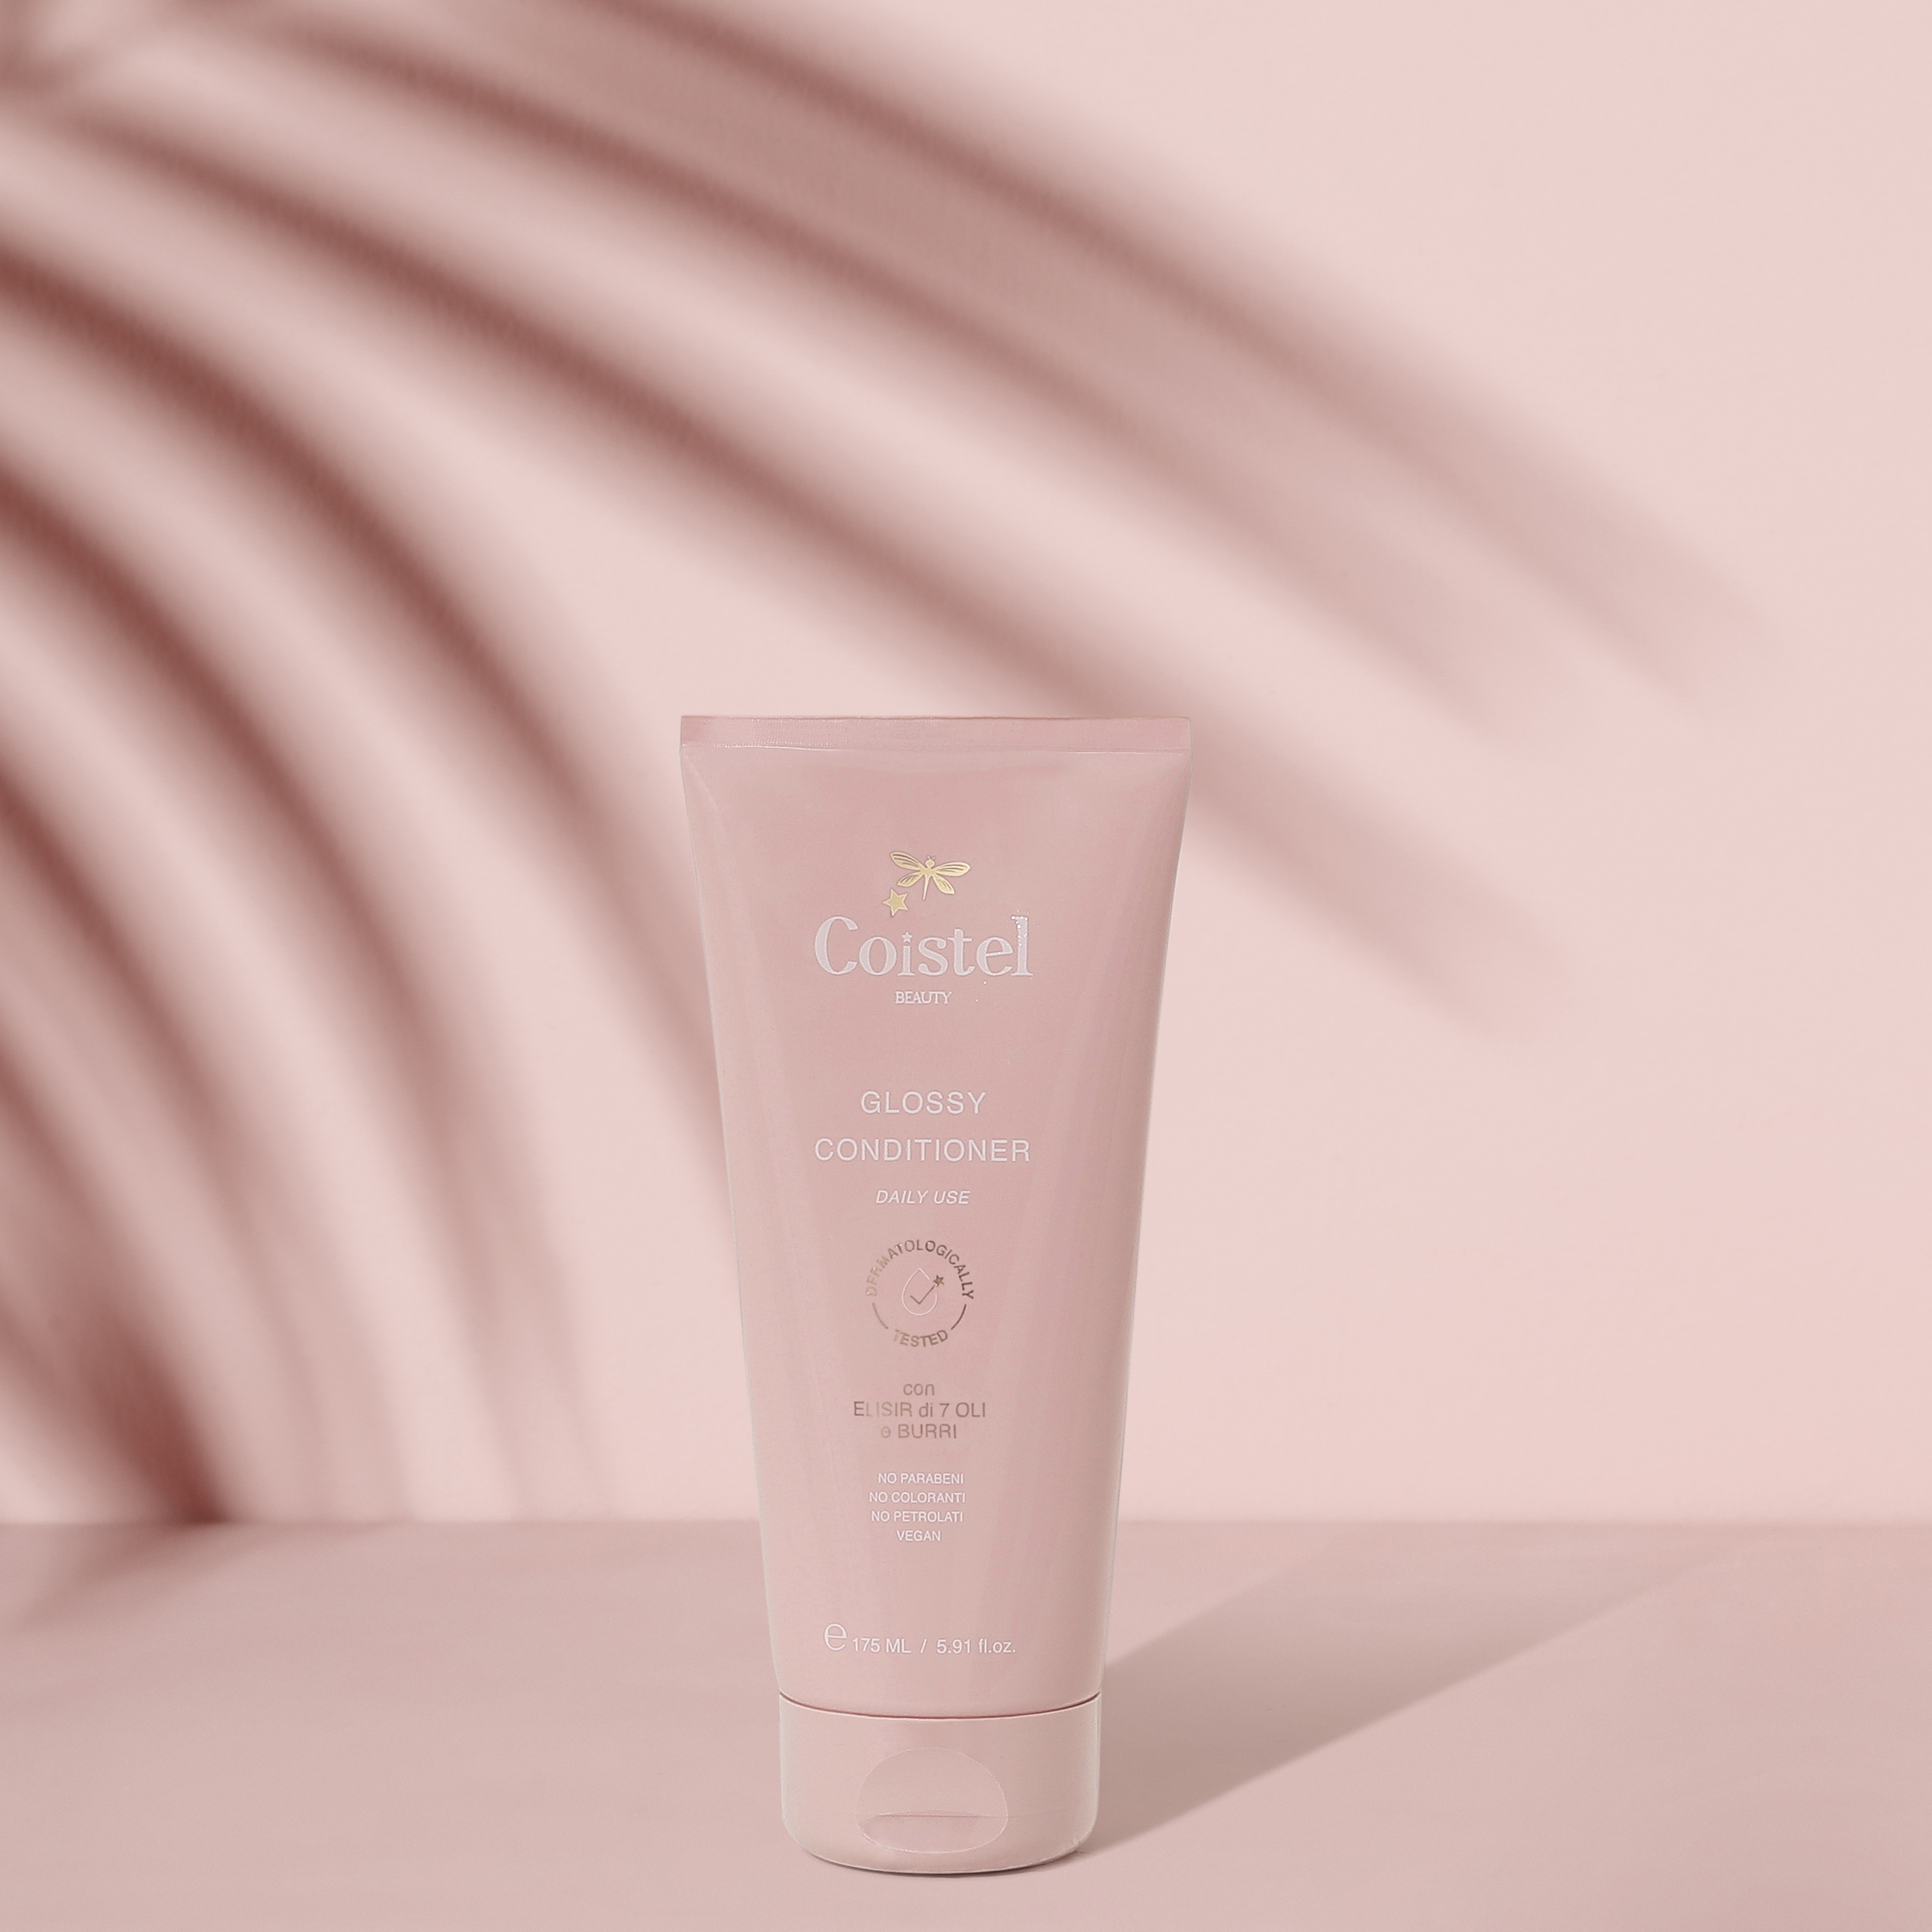 Coistel Glossy Conditioner - Mobile